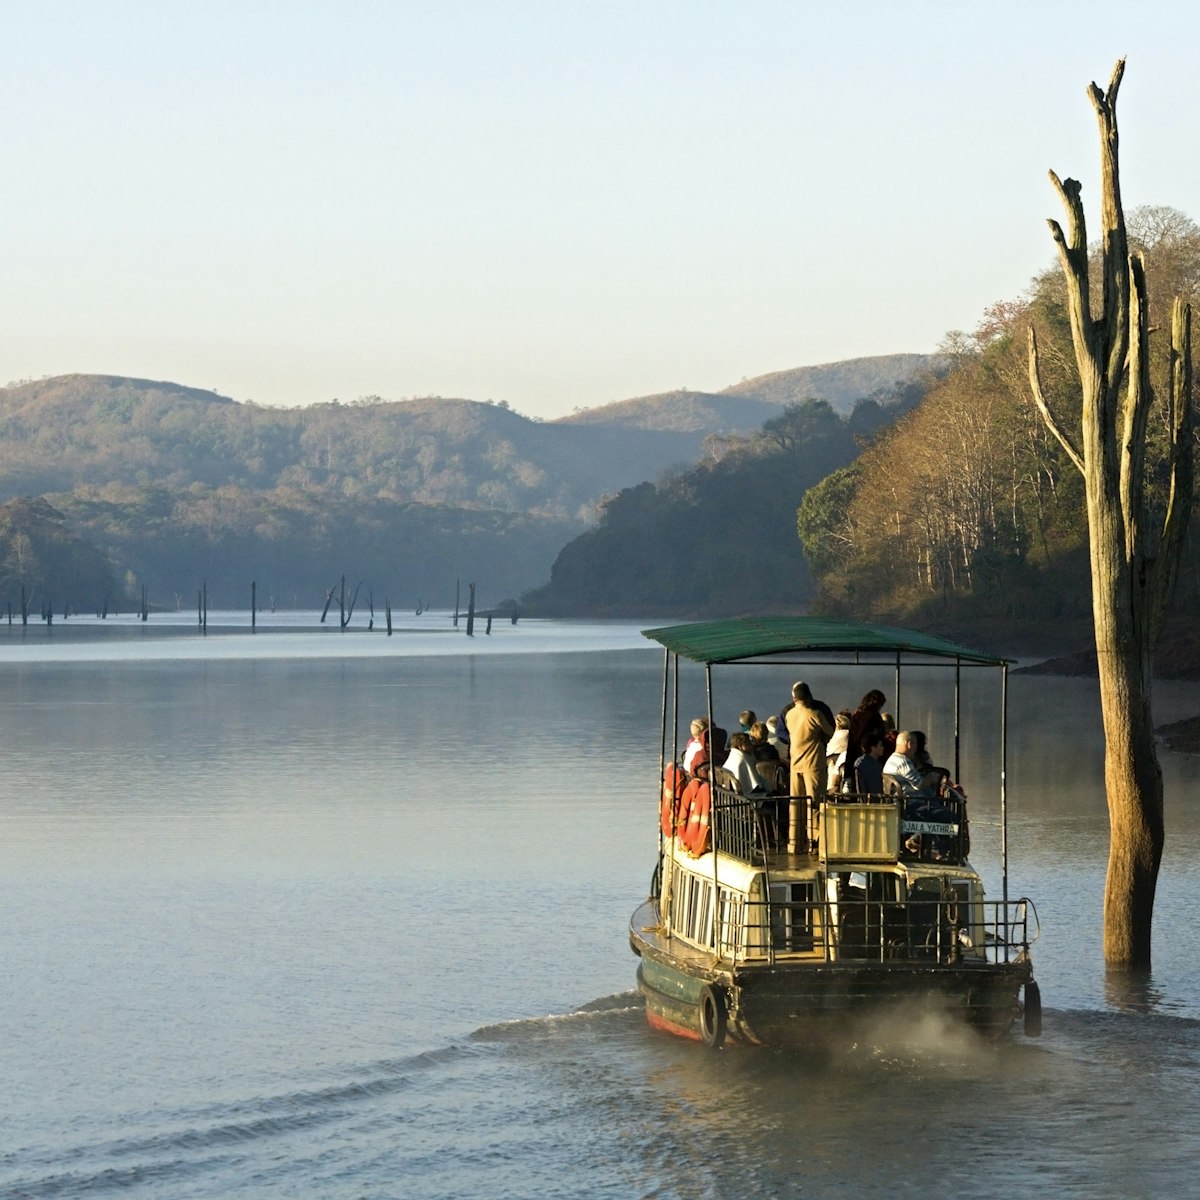 Sightseeing cruise passing dead tree on lake at Periyar Wildlife Sanctuary in early morning.